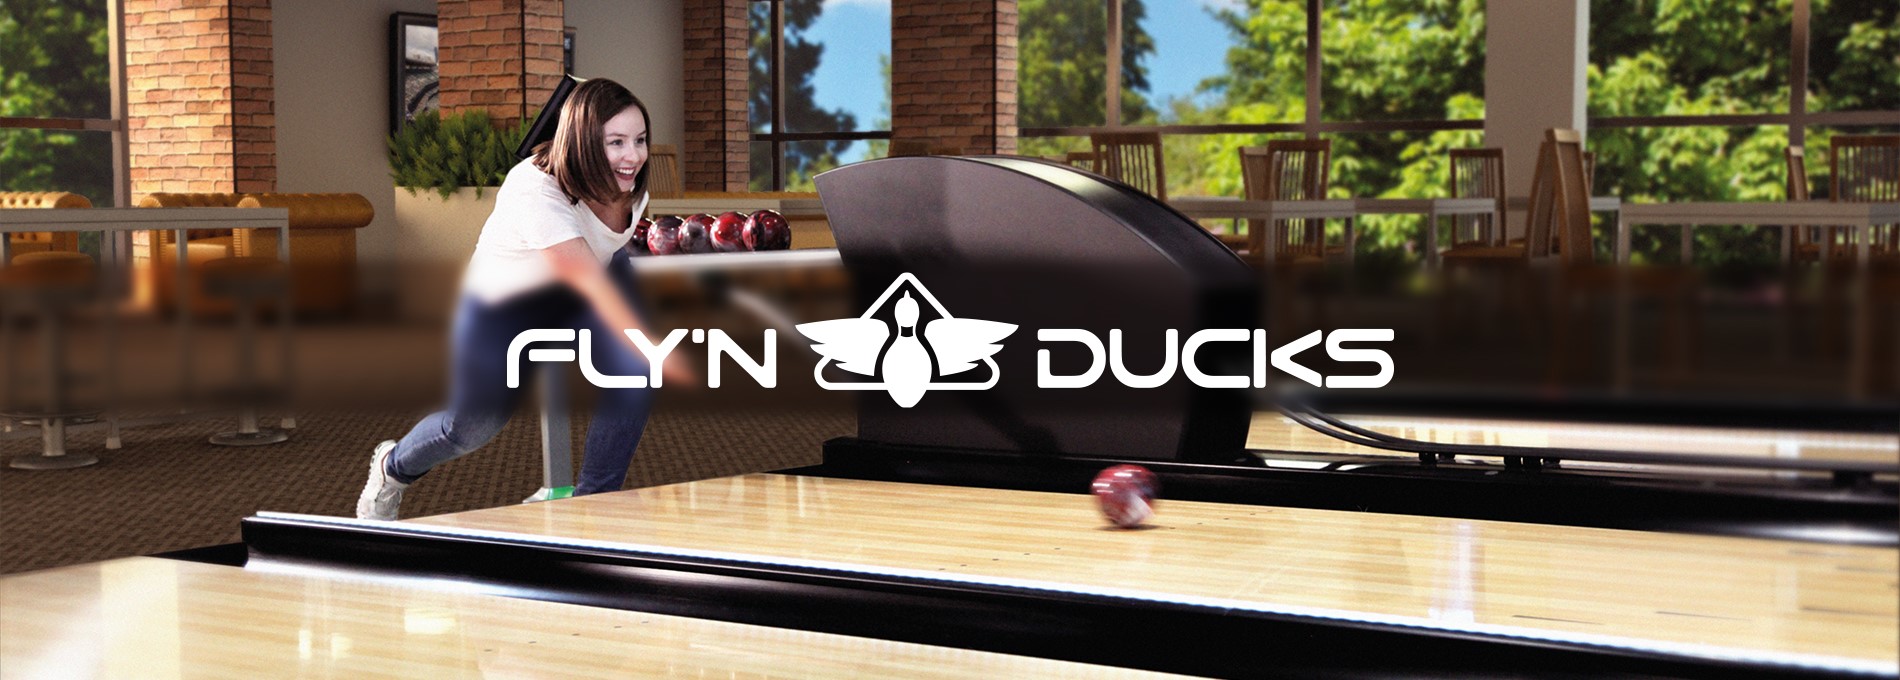 Flyn ducks bowling qubicaamf home banner